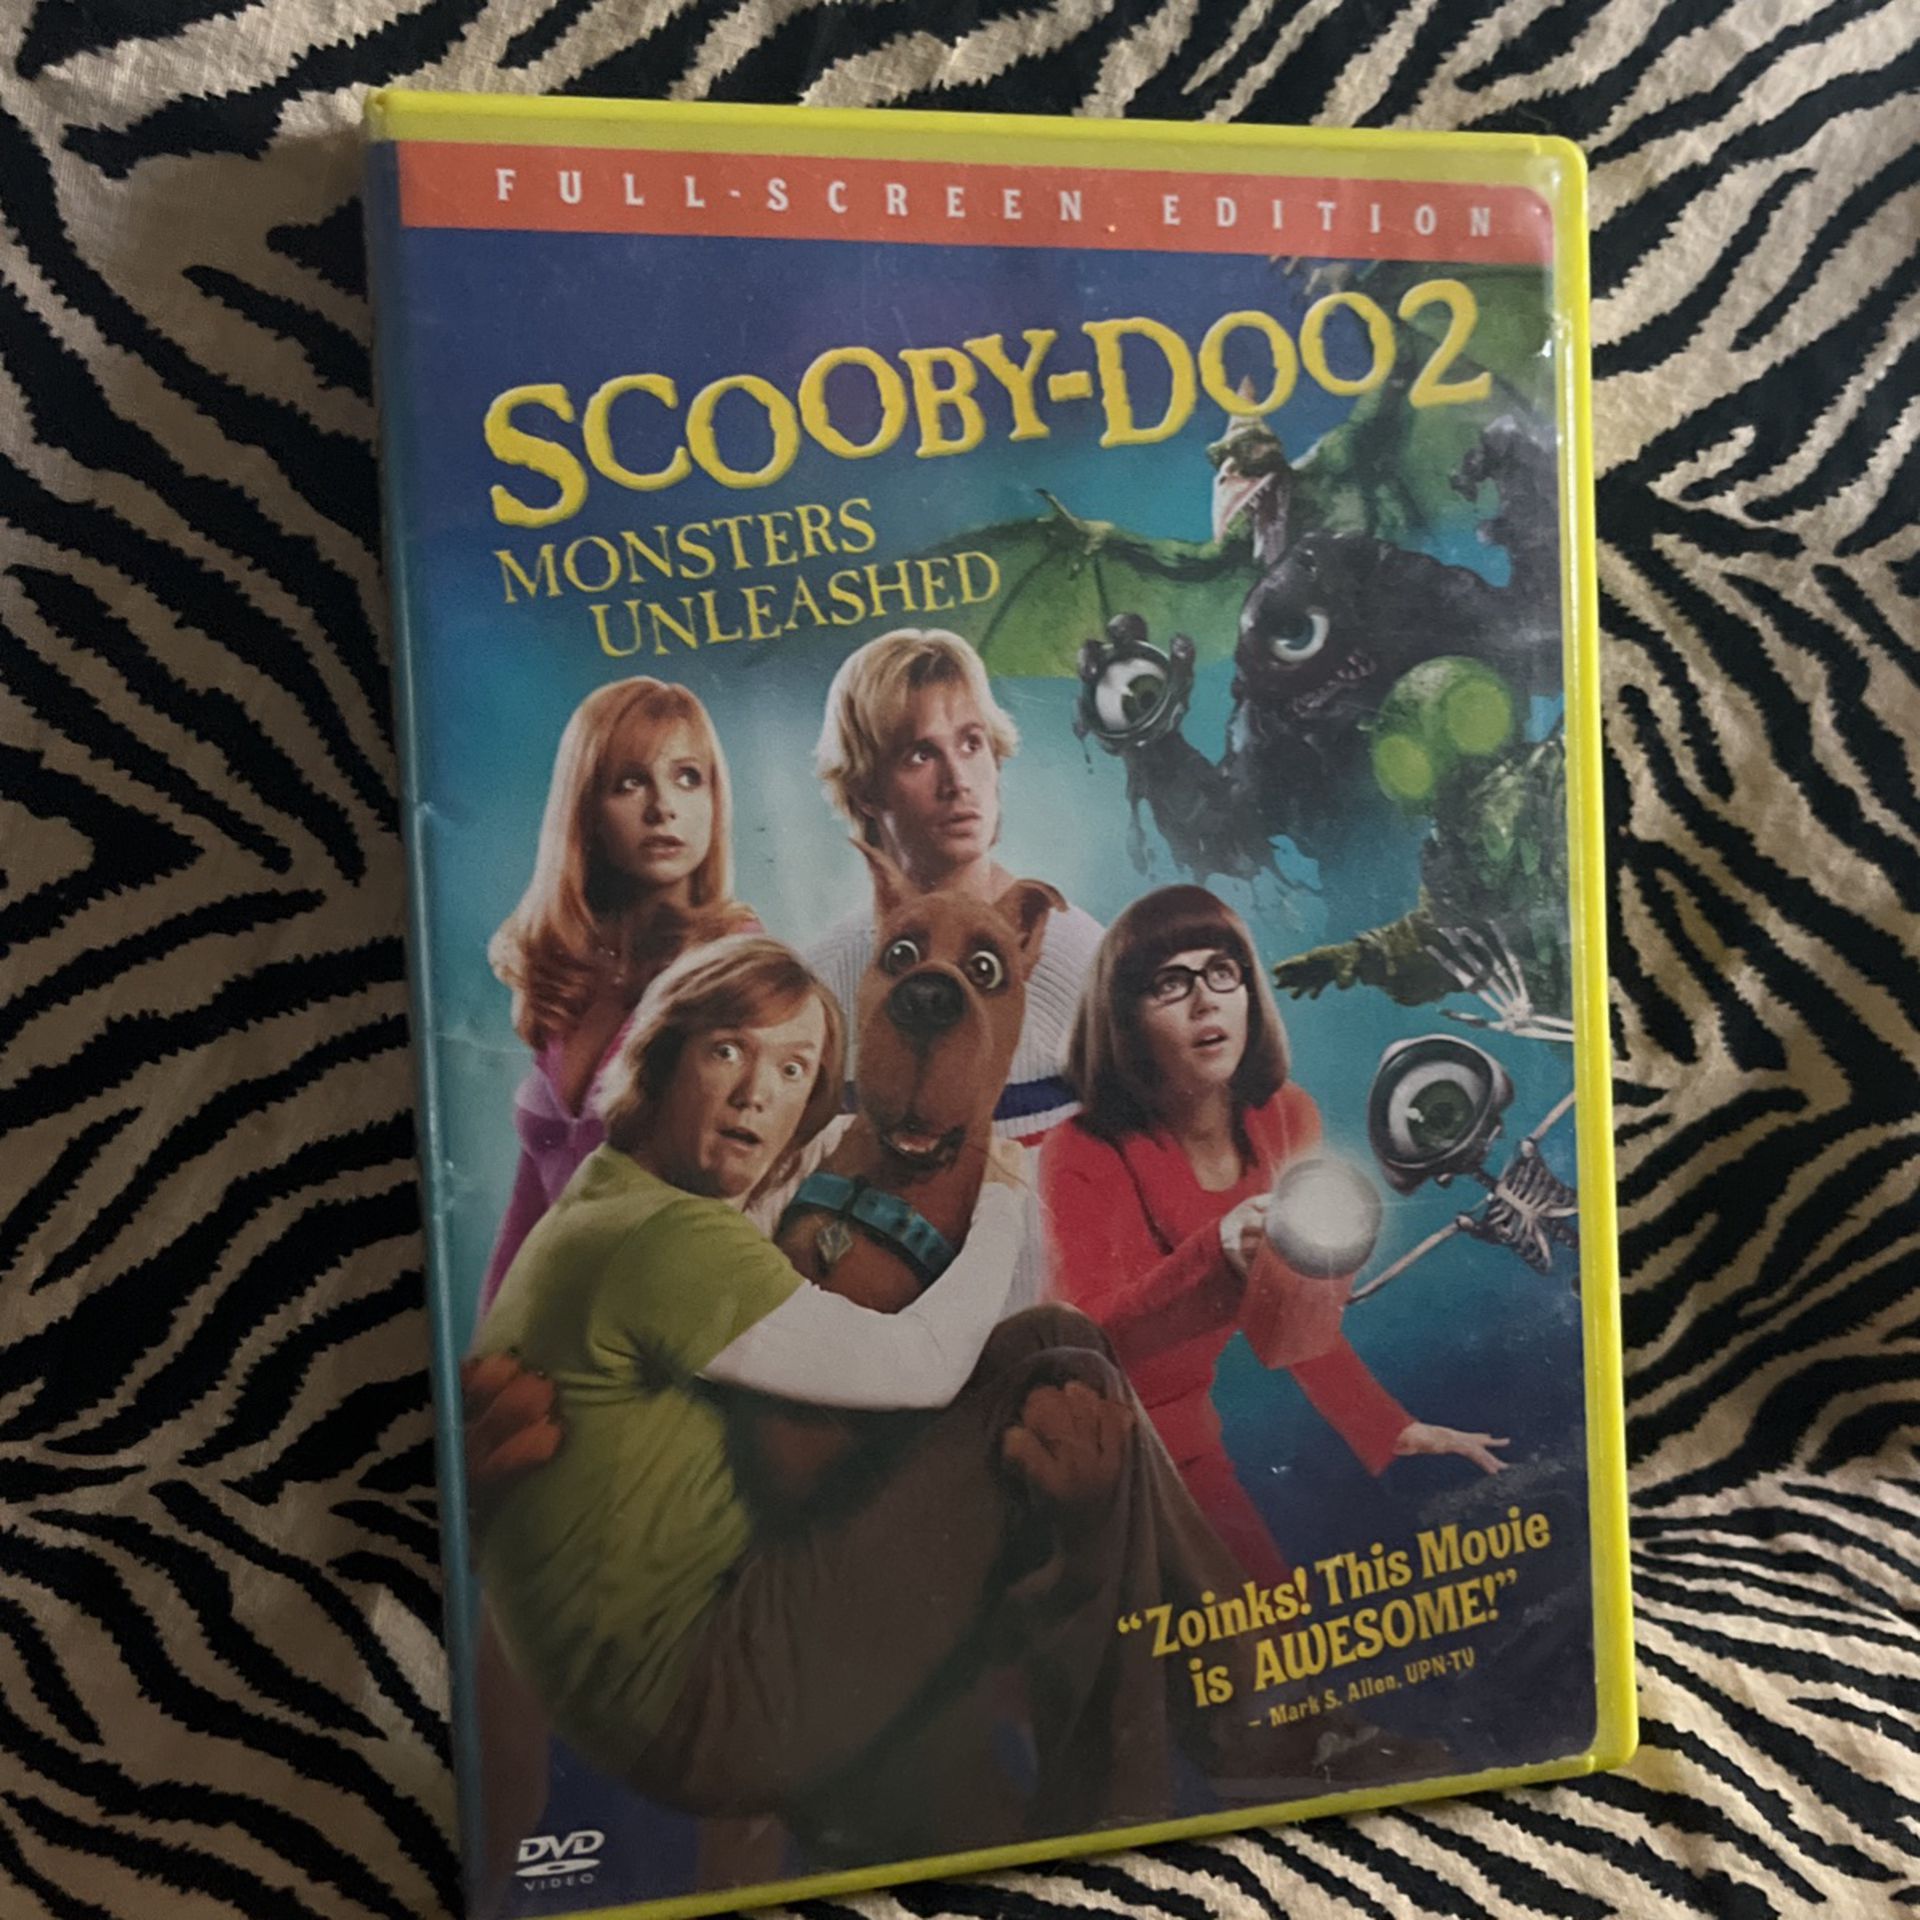 Scooby-Doo2 Monsters Unleashed 